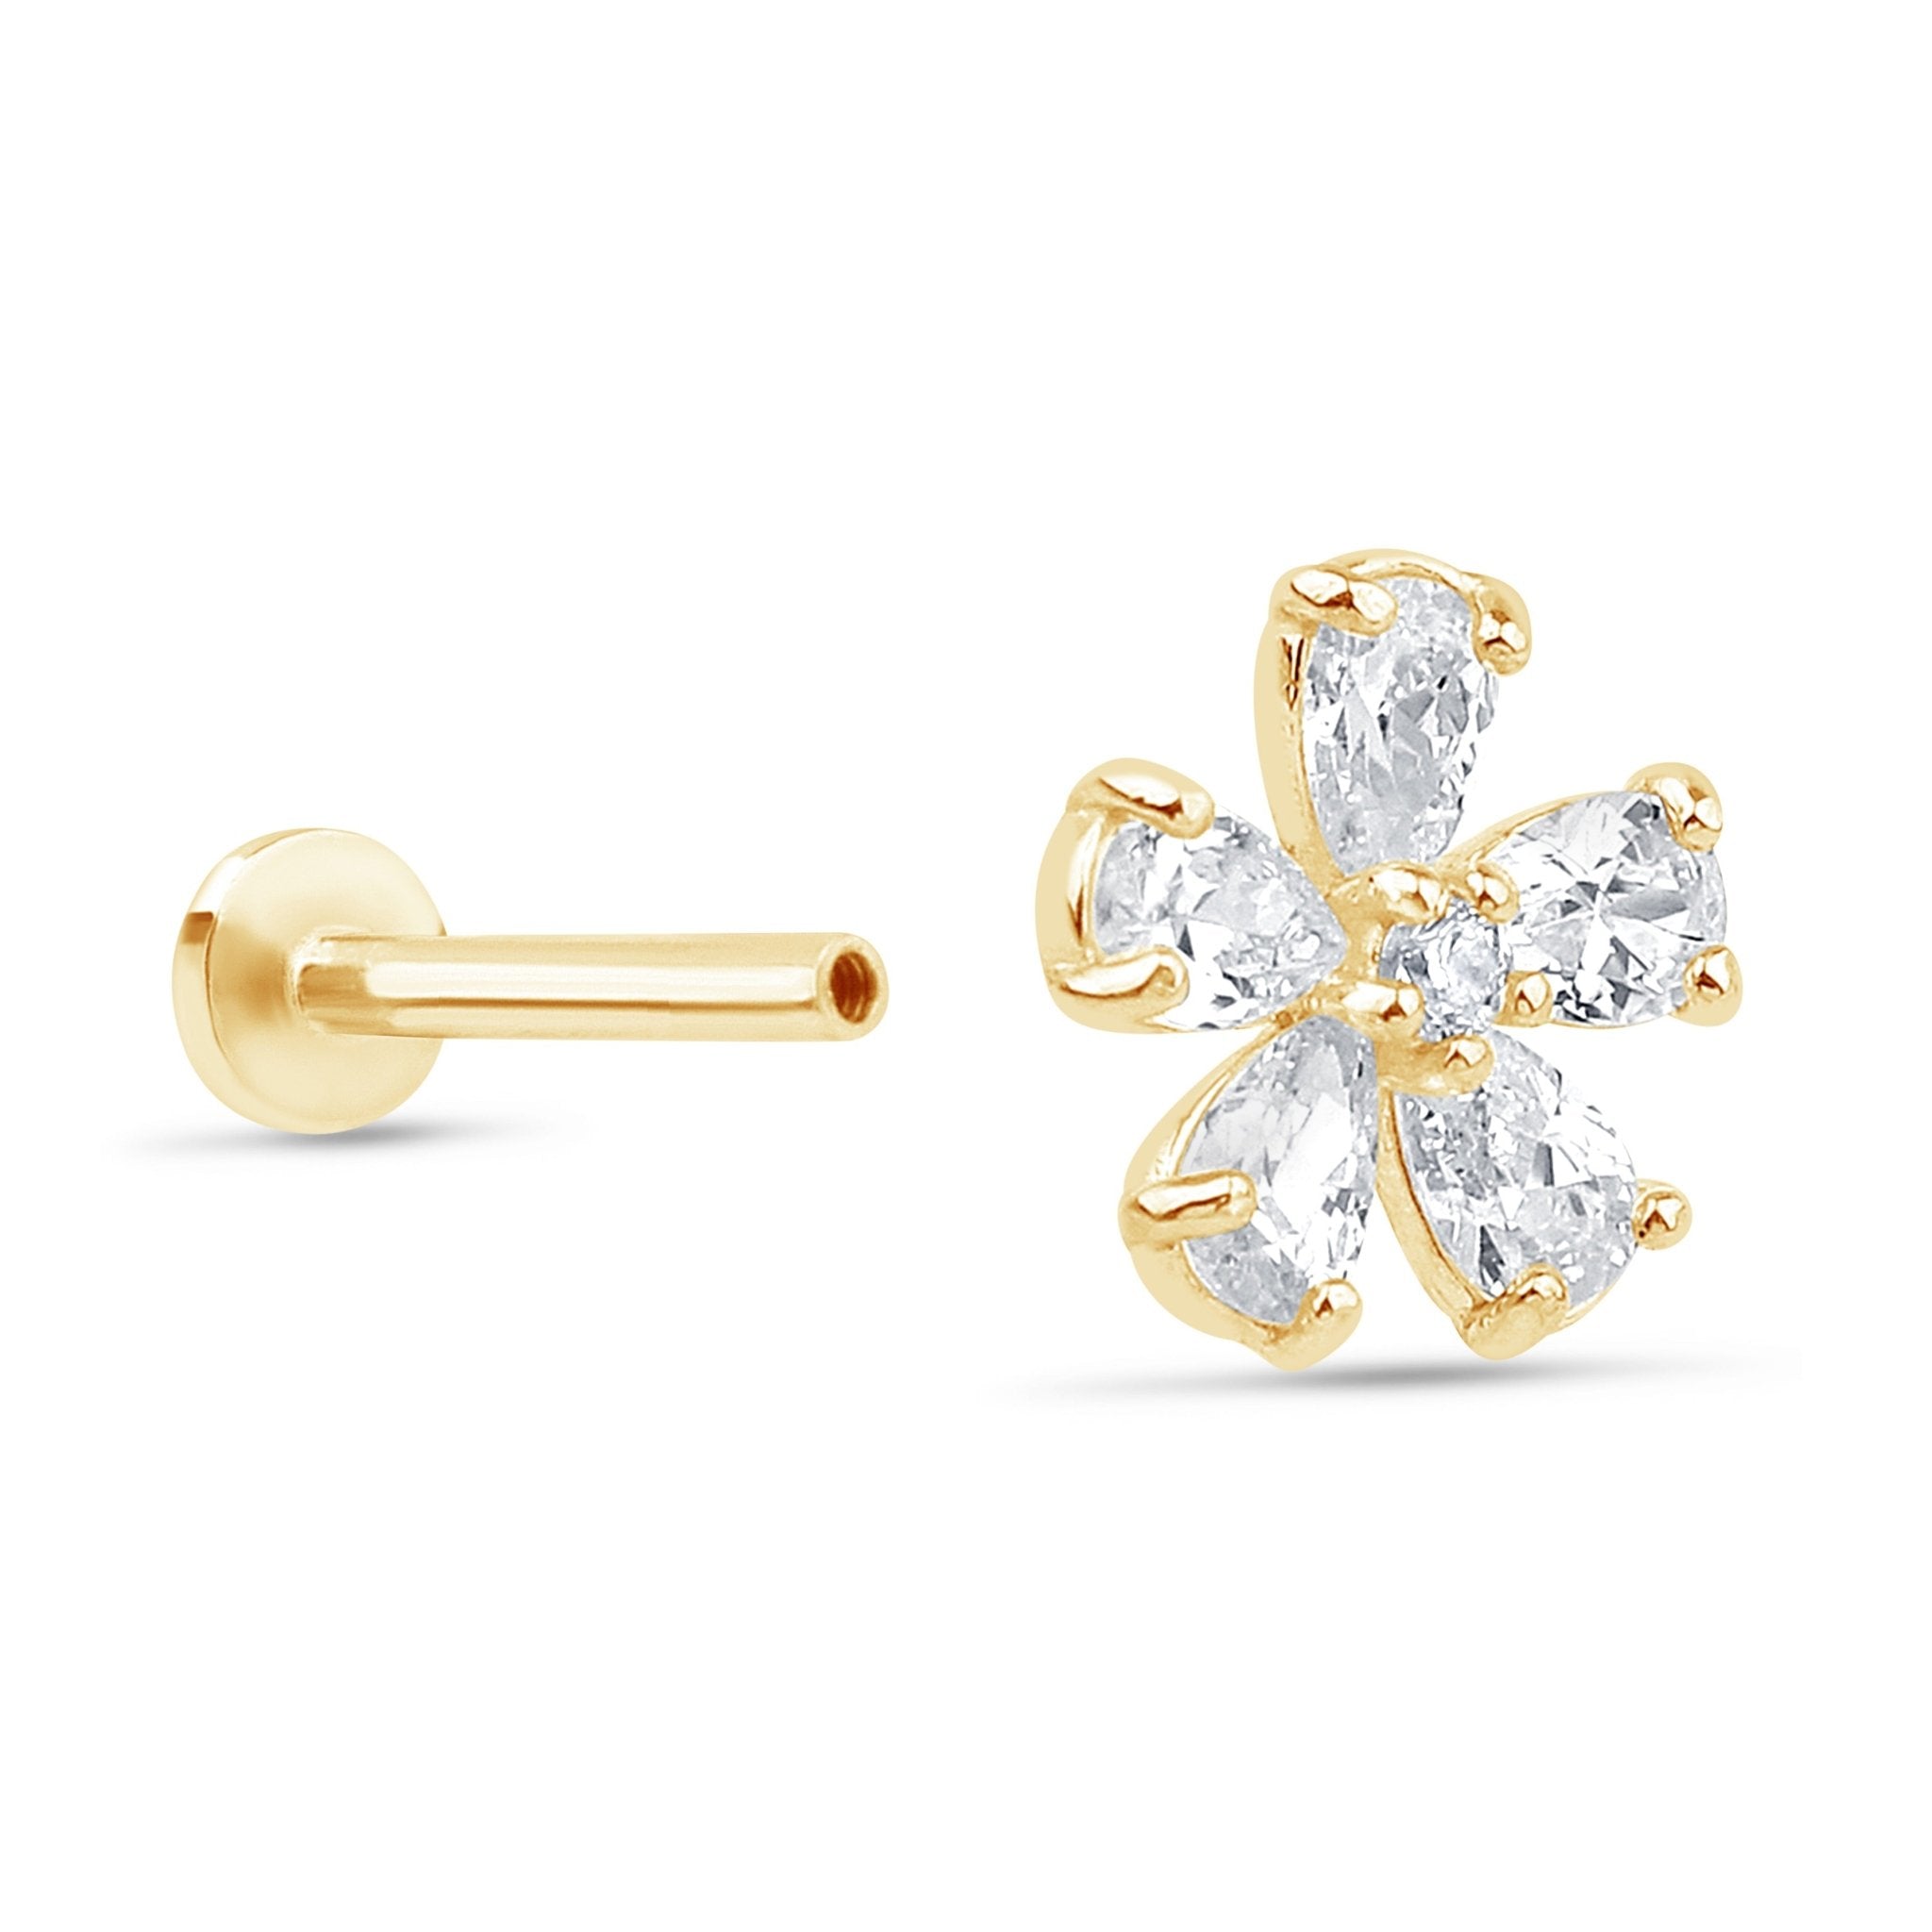 Blooming Flower Earring in Solid 14k Yellow Gold Earrings Estella Collection #product_description# 18581 new New Arrivals test test mechanic #tag4# #tag5# #tag6# #tag7# #tag8# #tag9# #tag10#